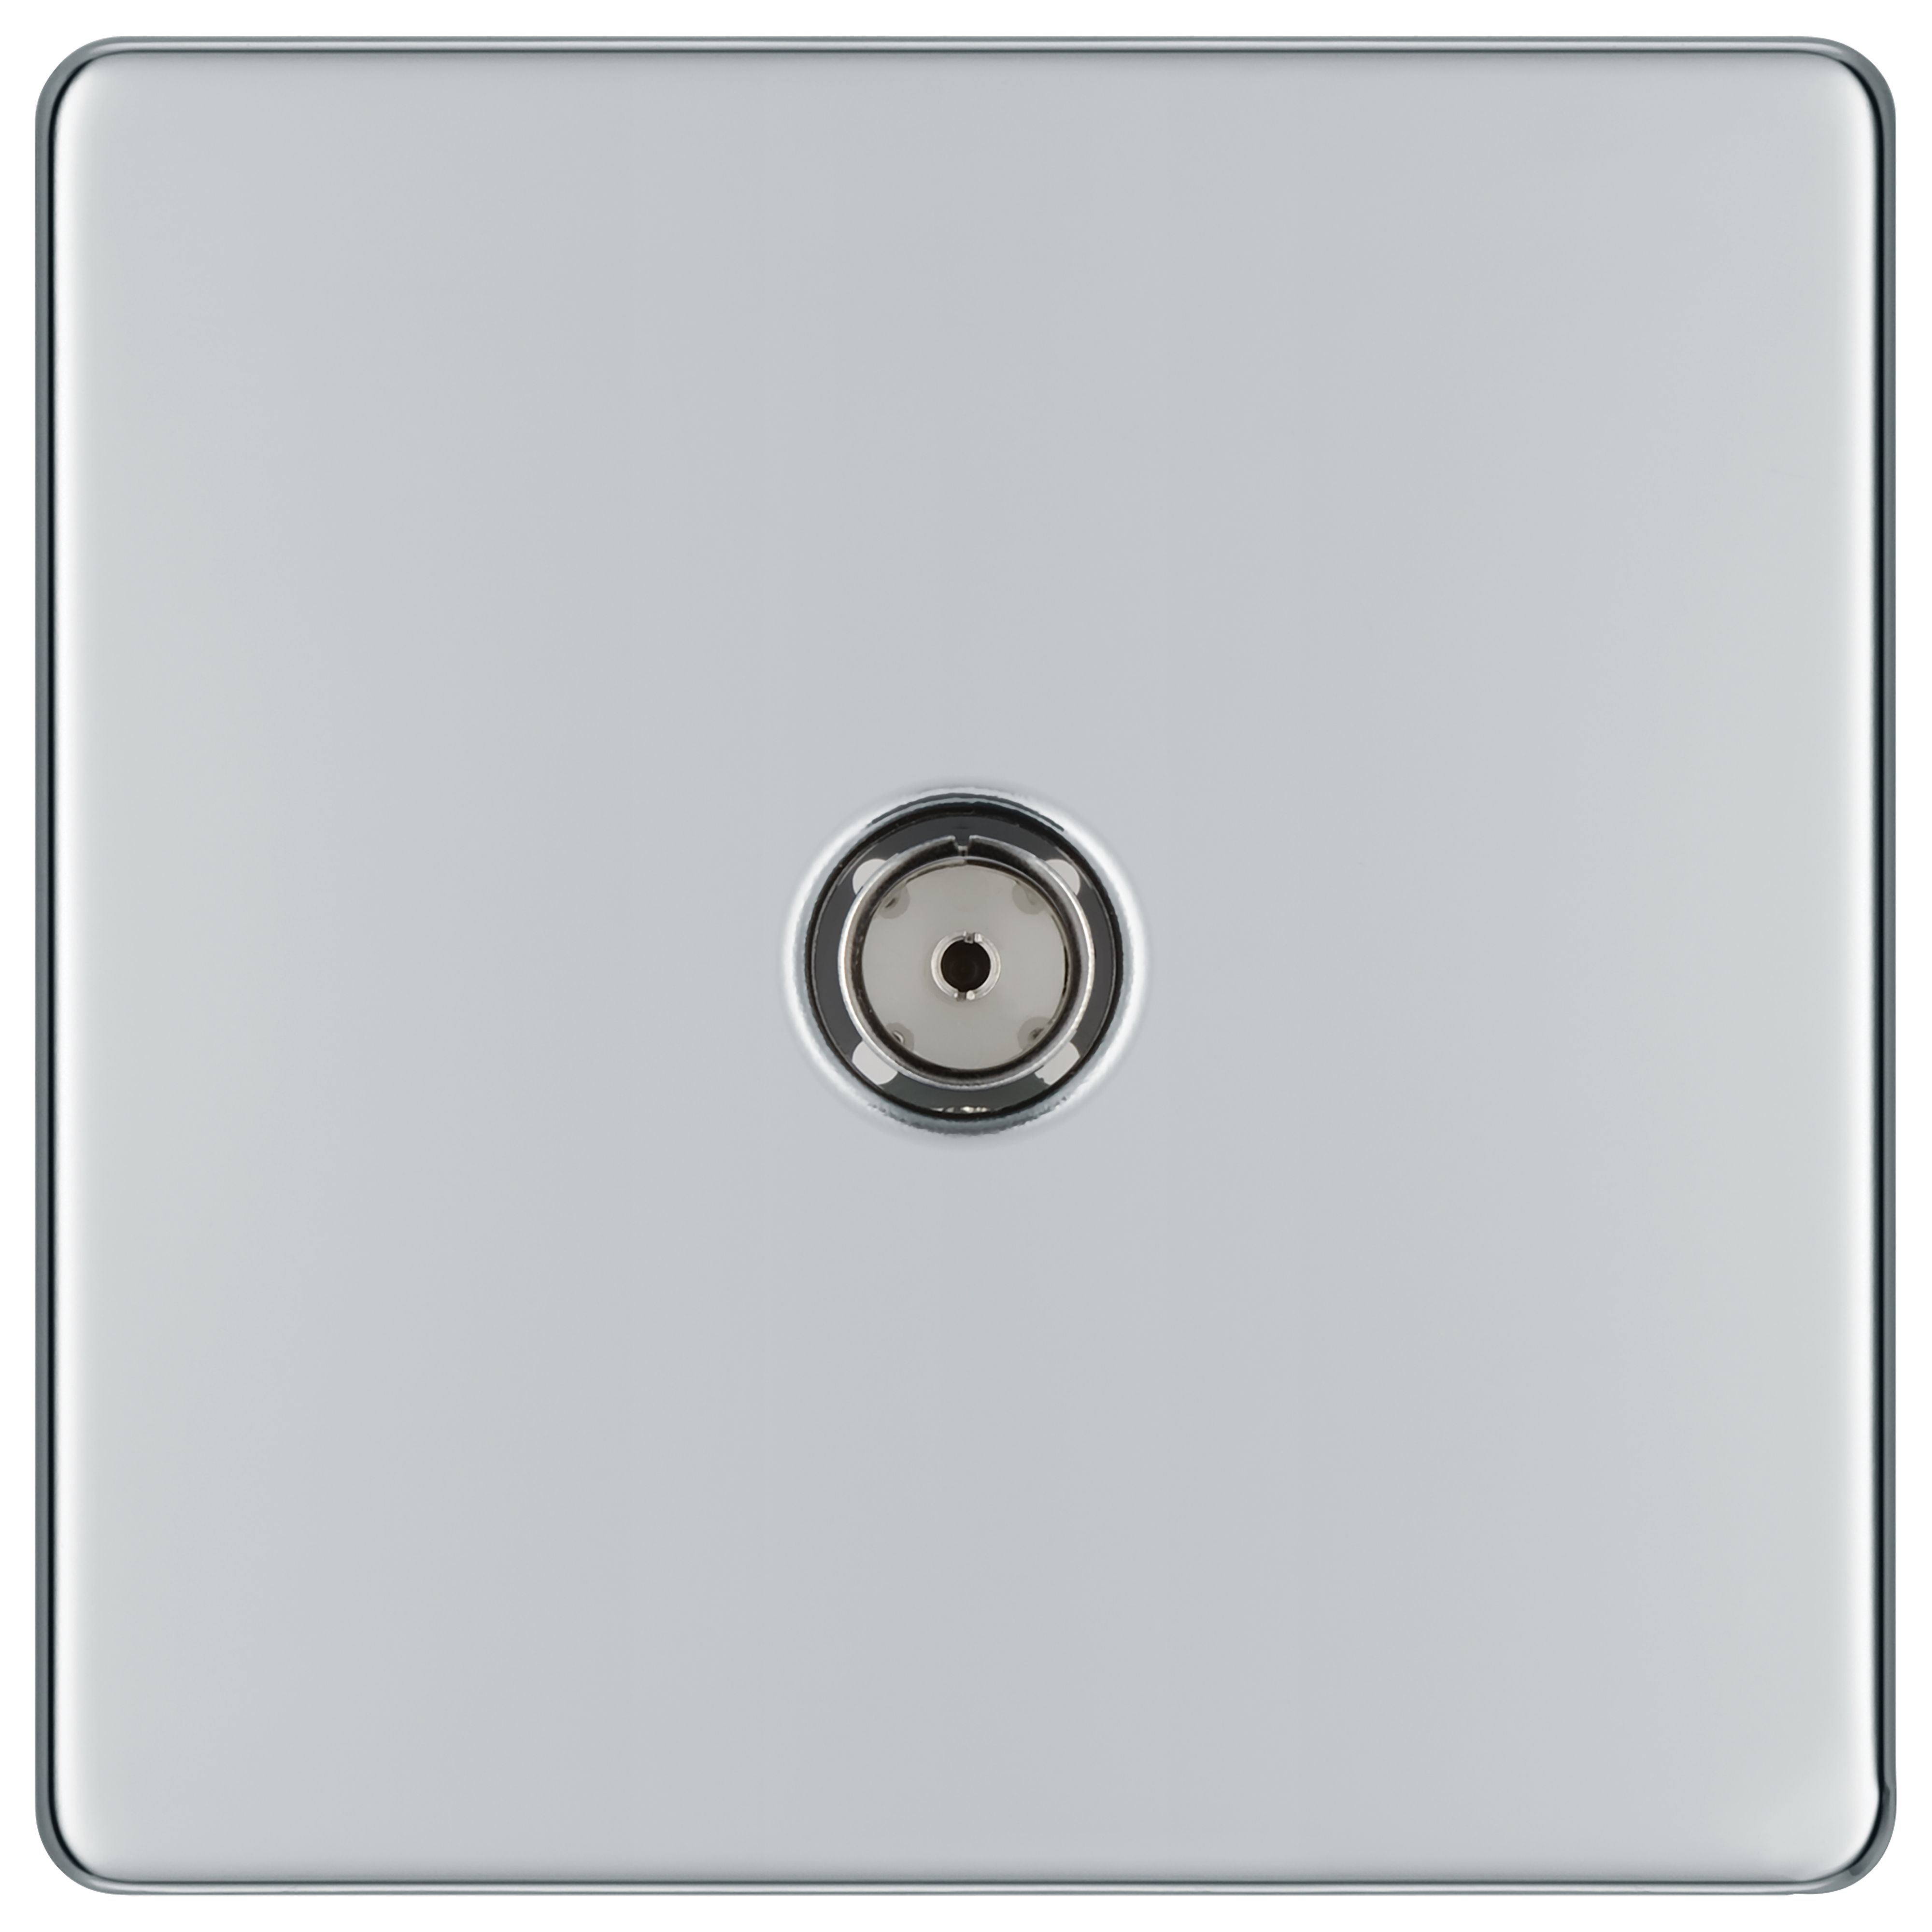 BG Screwless Flat Plate Single Socket For Tv Or Fm Co-Axial Aerial Connection - Polished Chrome